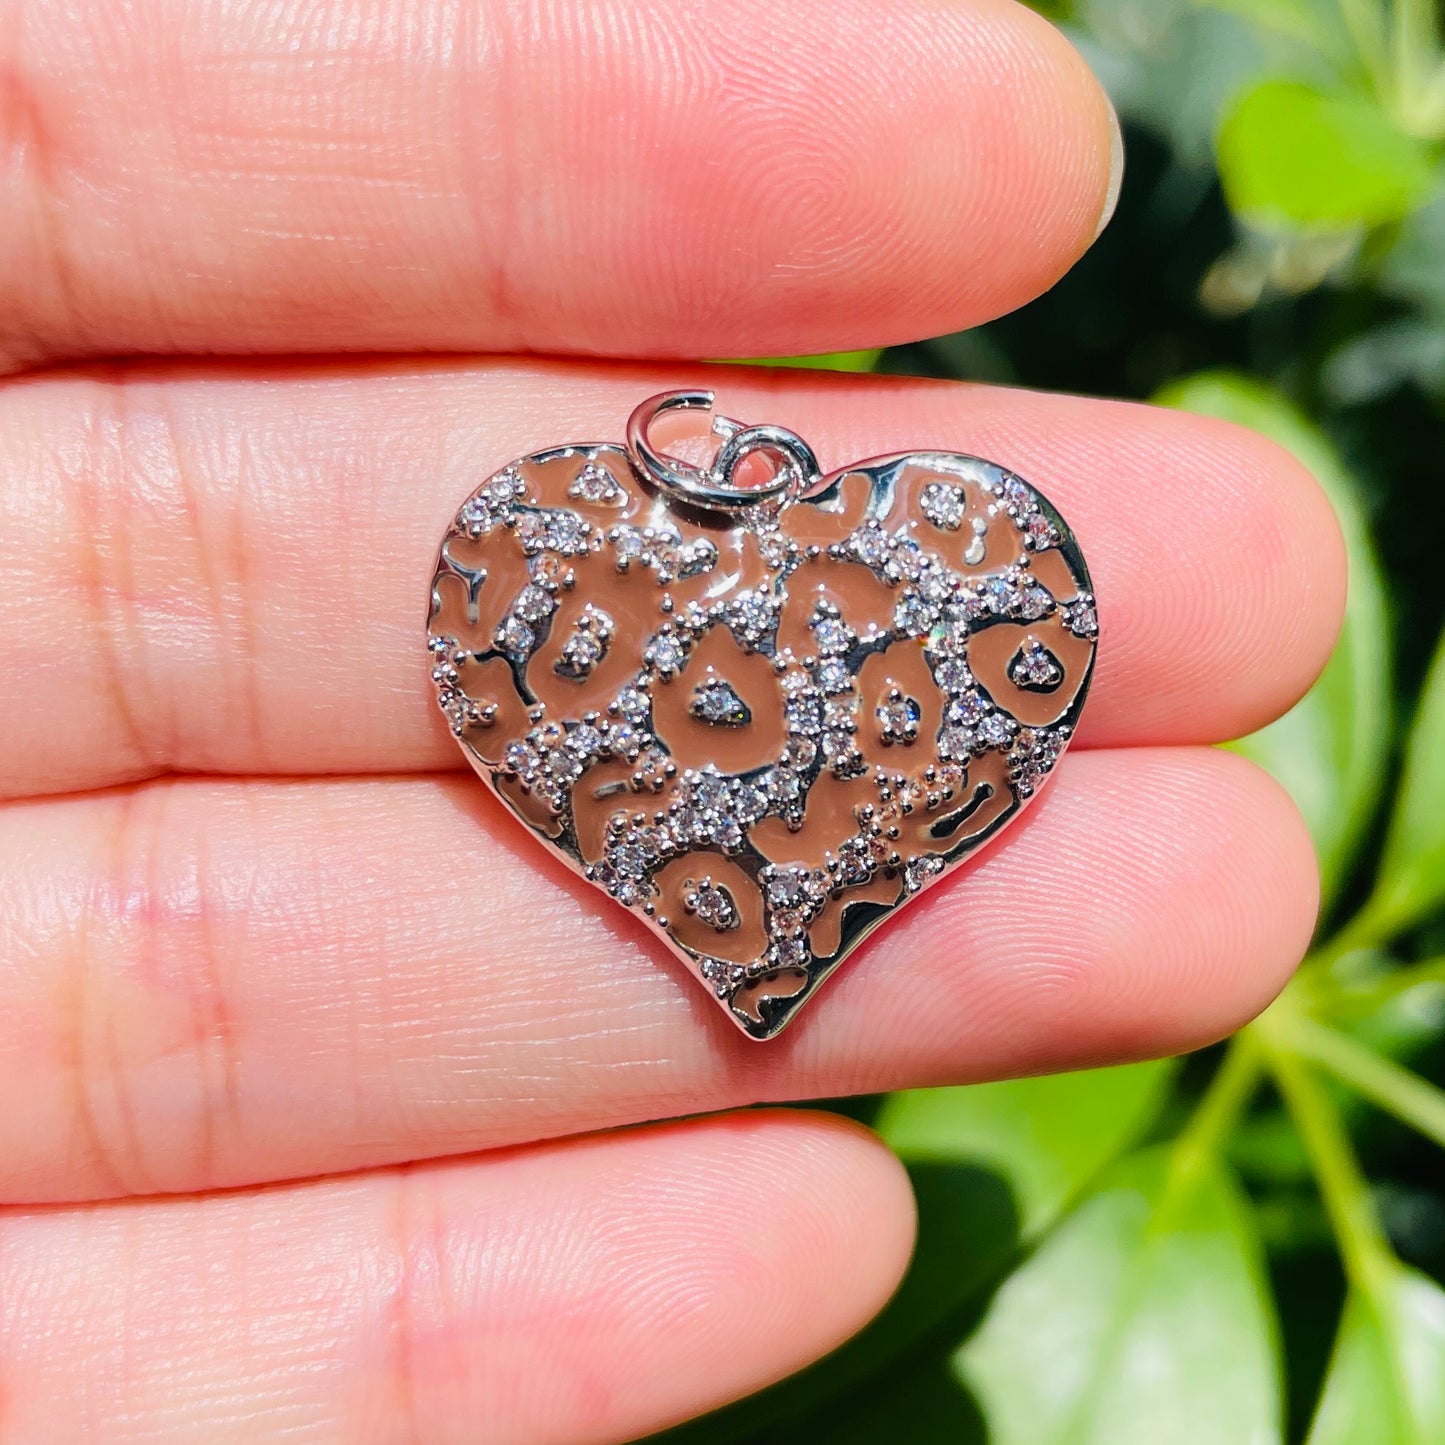 10/lot 24.5*22mm CZ Paved Brown Leopard Print Heart Charm Pendants CZ Paved Charms Hearts Leopard Printed New Charms Arrivals Charms Beads Beyond